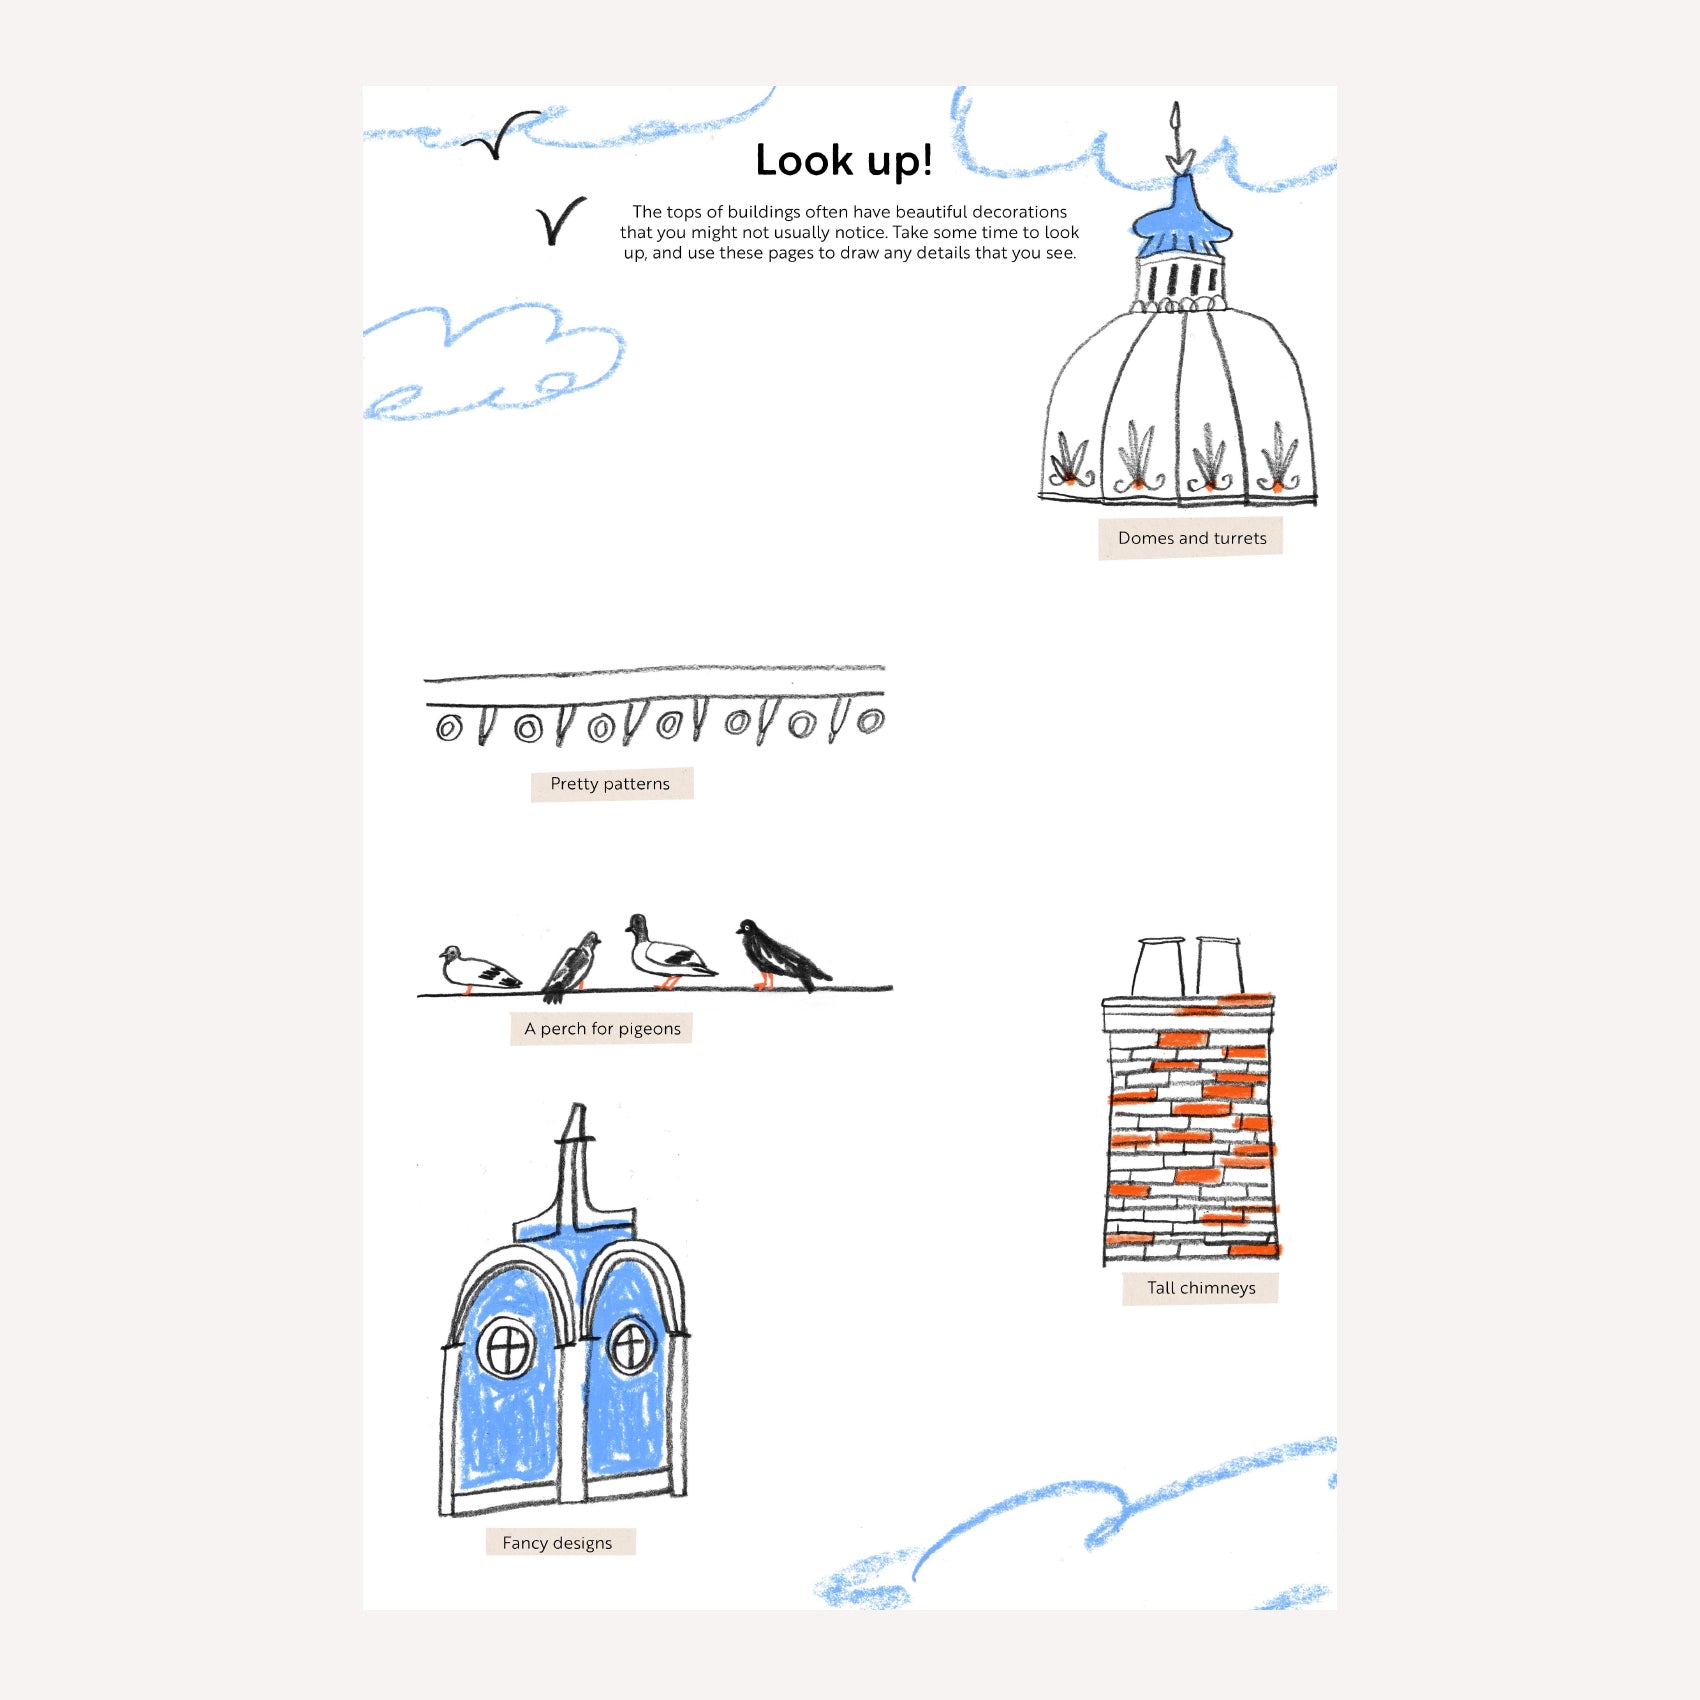 Inside “The Looking Book” by Lucia Vinti. This double page spread encourages readers to “look up” to find creative inspiration, with drawings of birds and rooftops. 